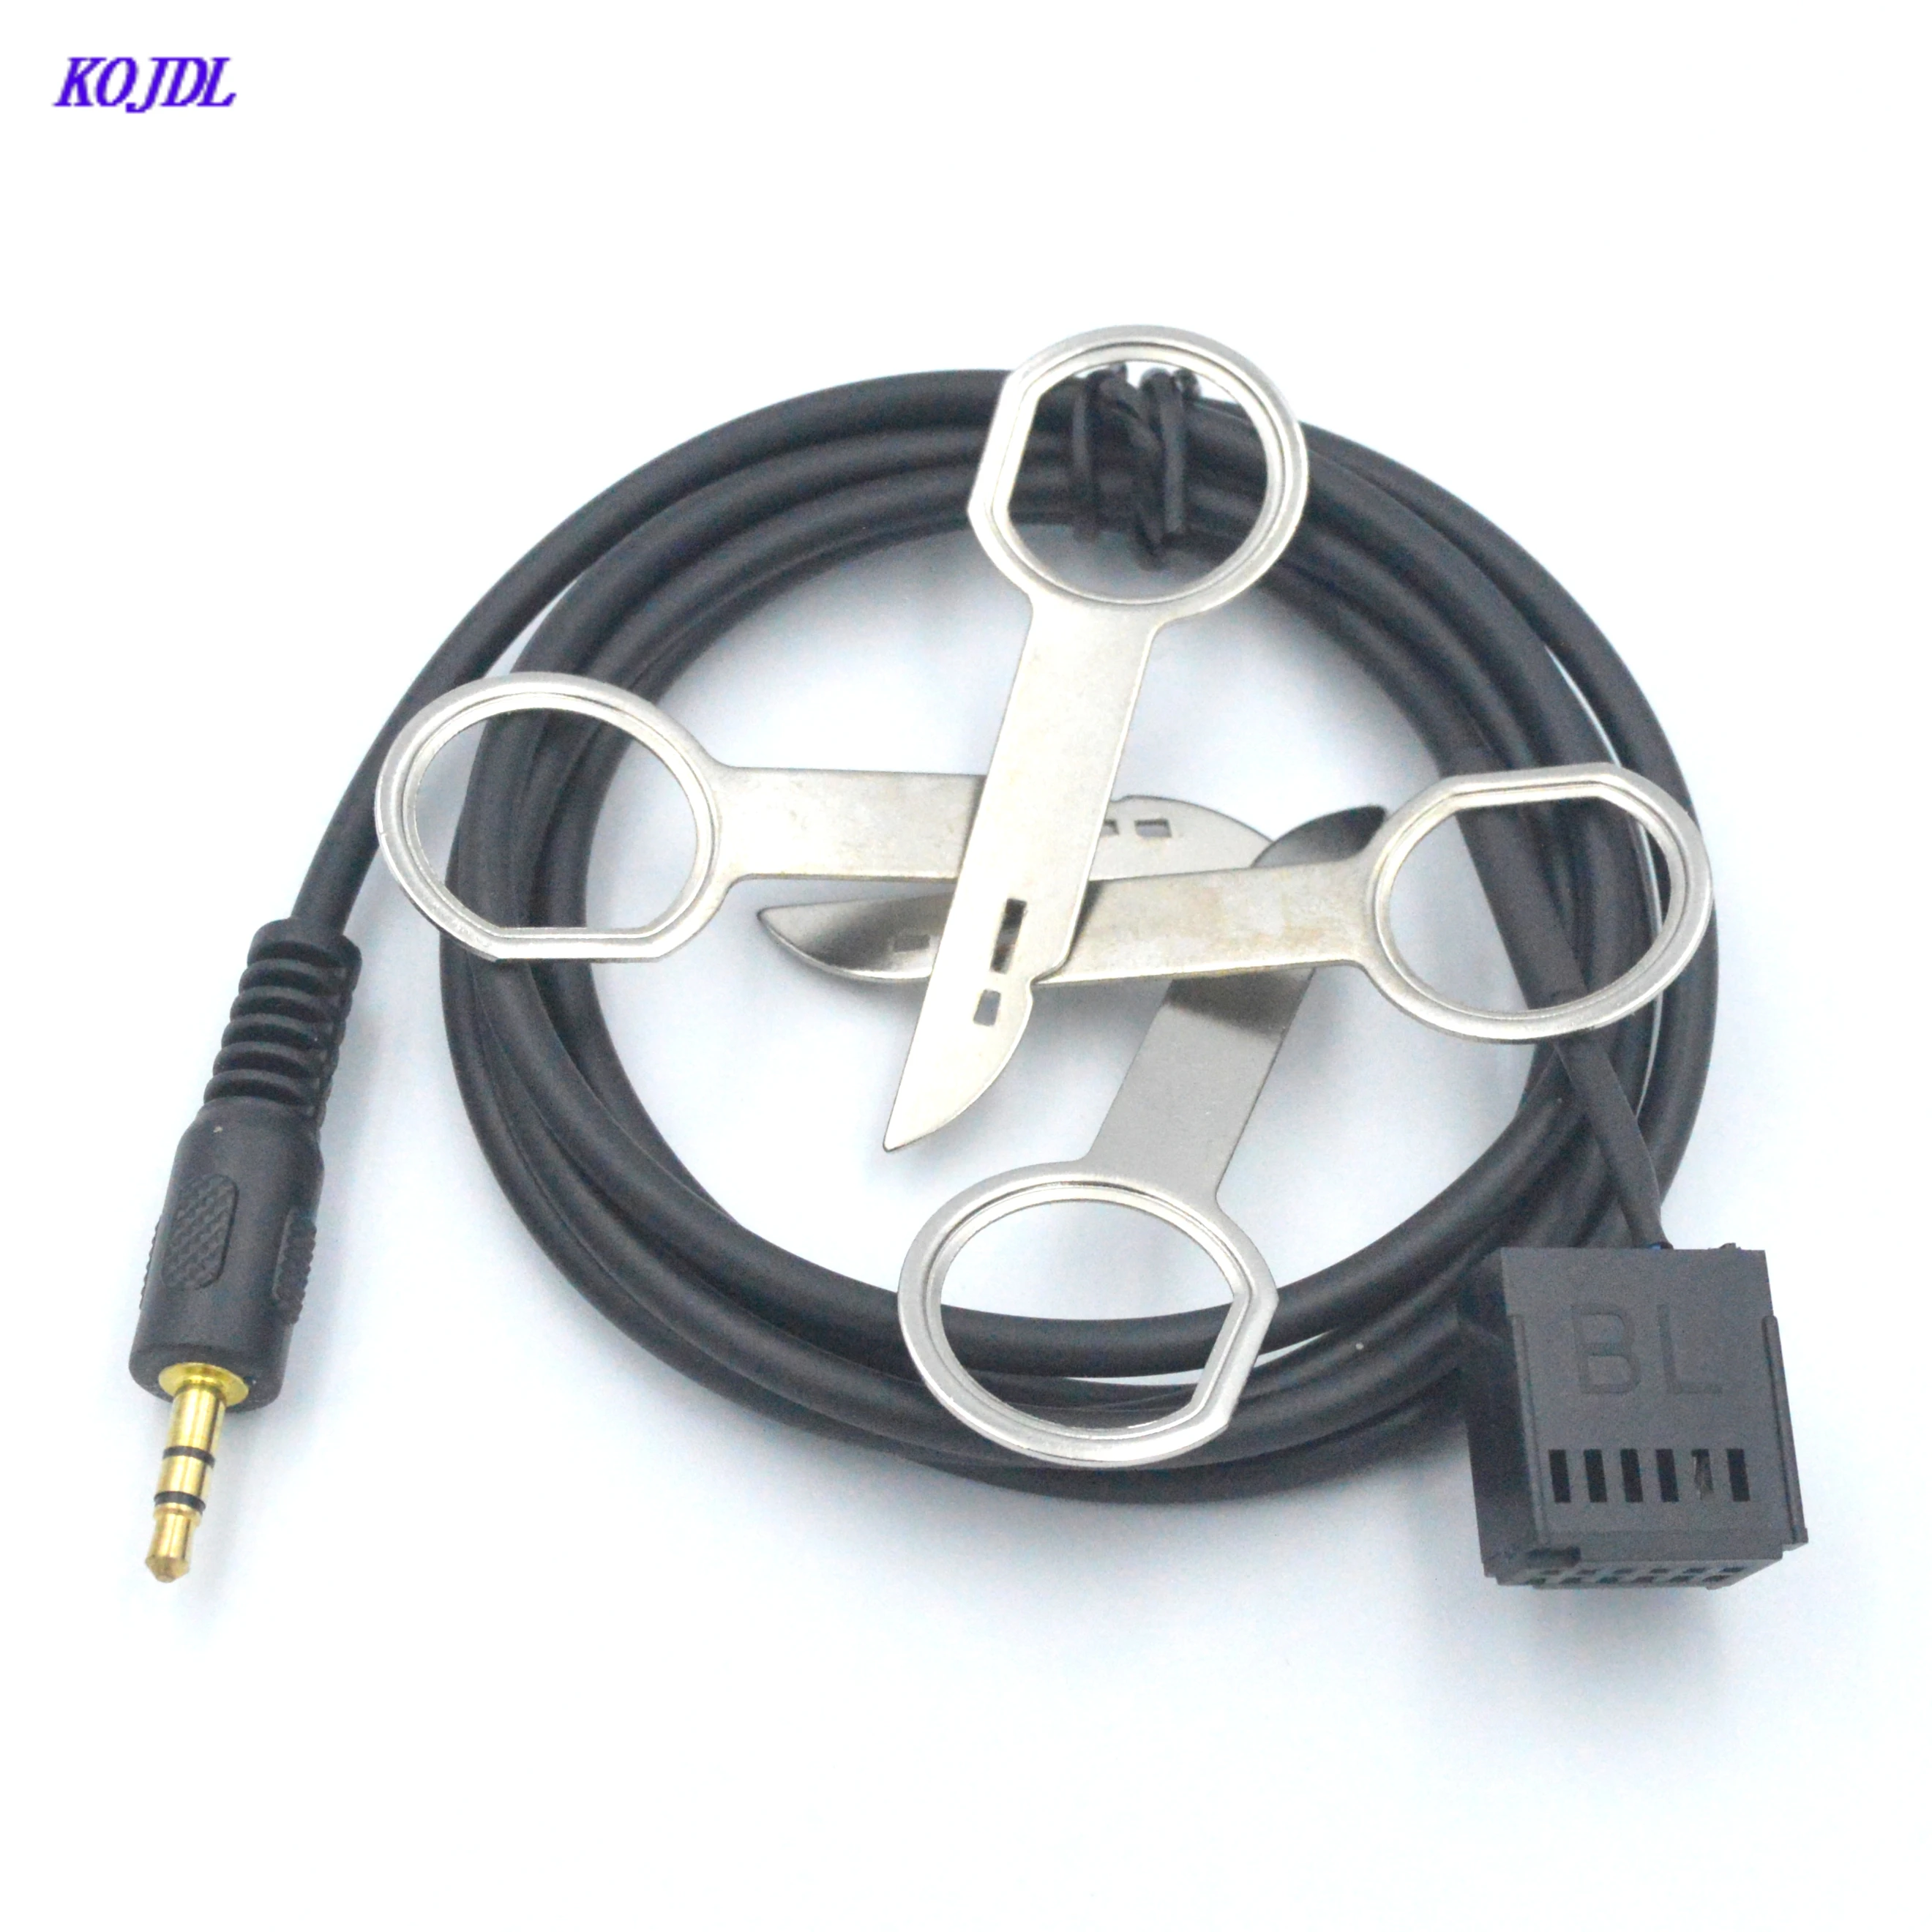 

Car 6000CD AUX-IN Wire ADAPTER CAR STEREO 6000-CD AUX CABLE for FORD FIESTA FOCUS Mondeo Fusion Galaxy C-Max S-Max Transit